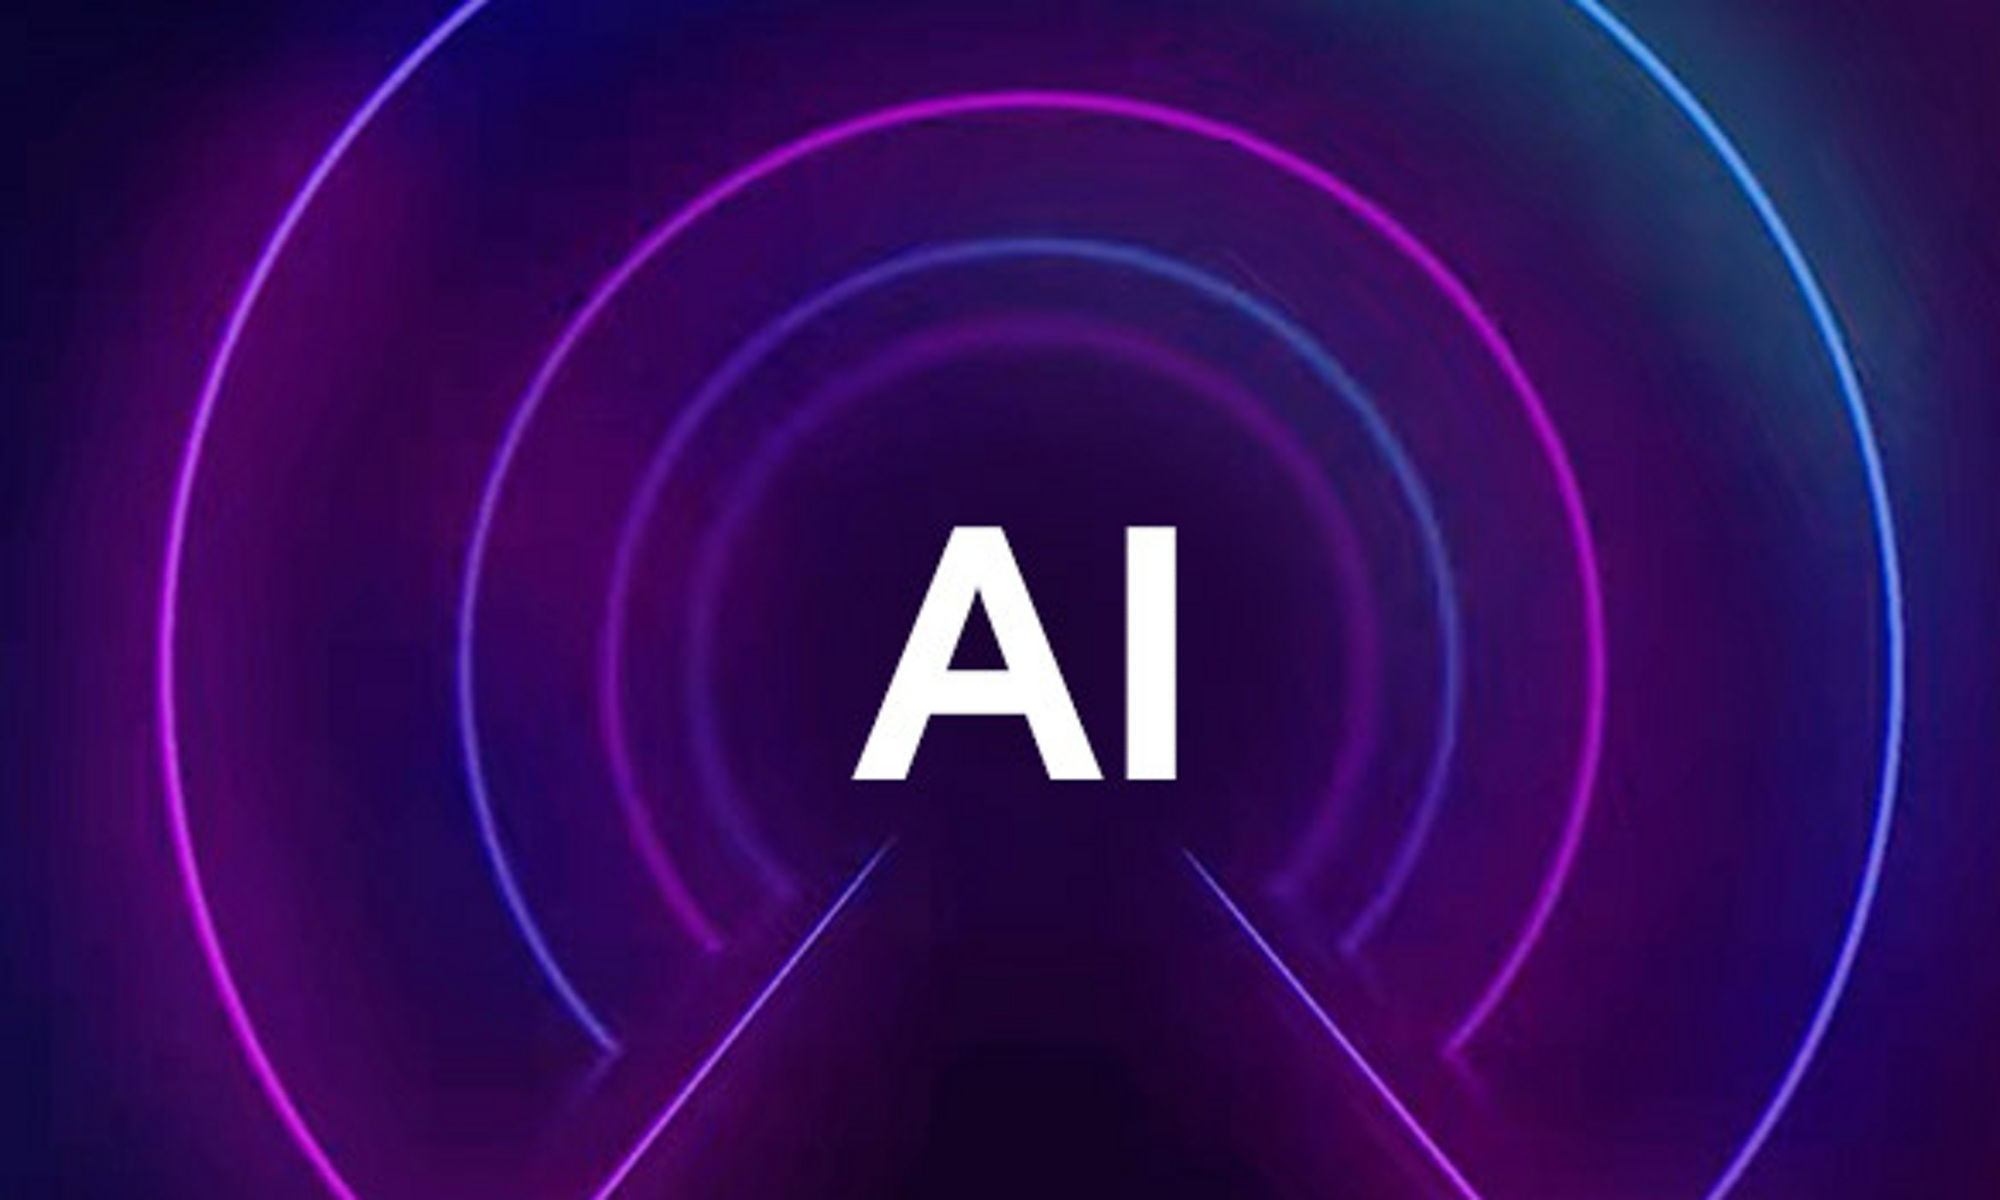 Blue, purple and pink circles with lines pointing to text "AI" in the center.